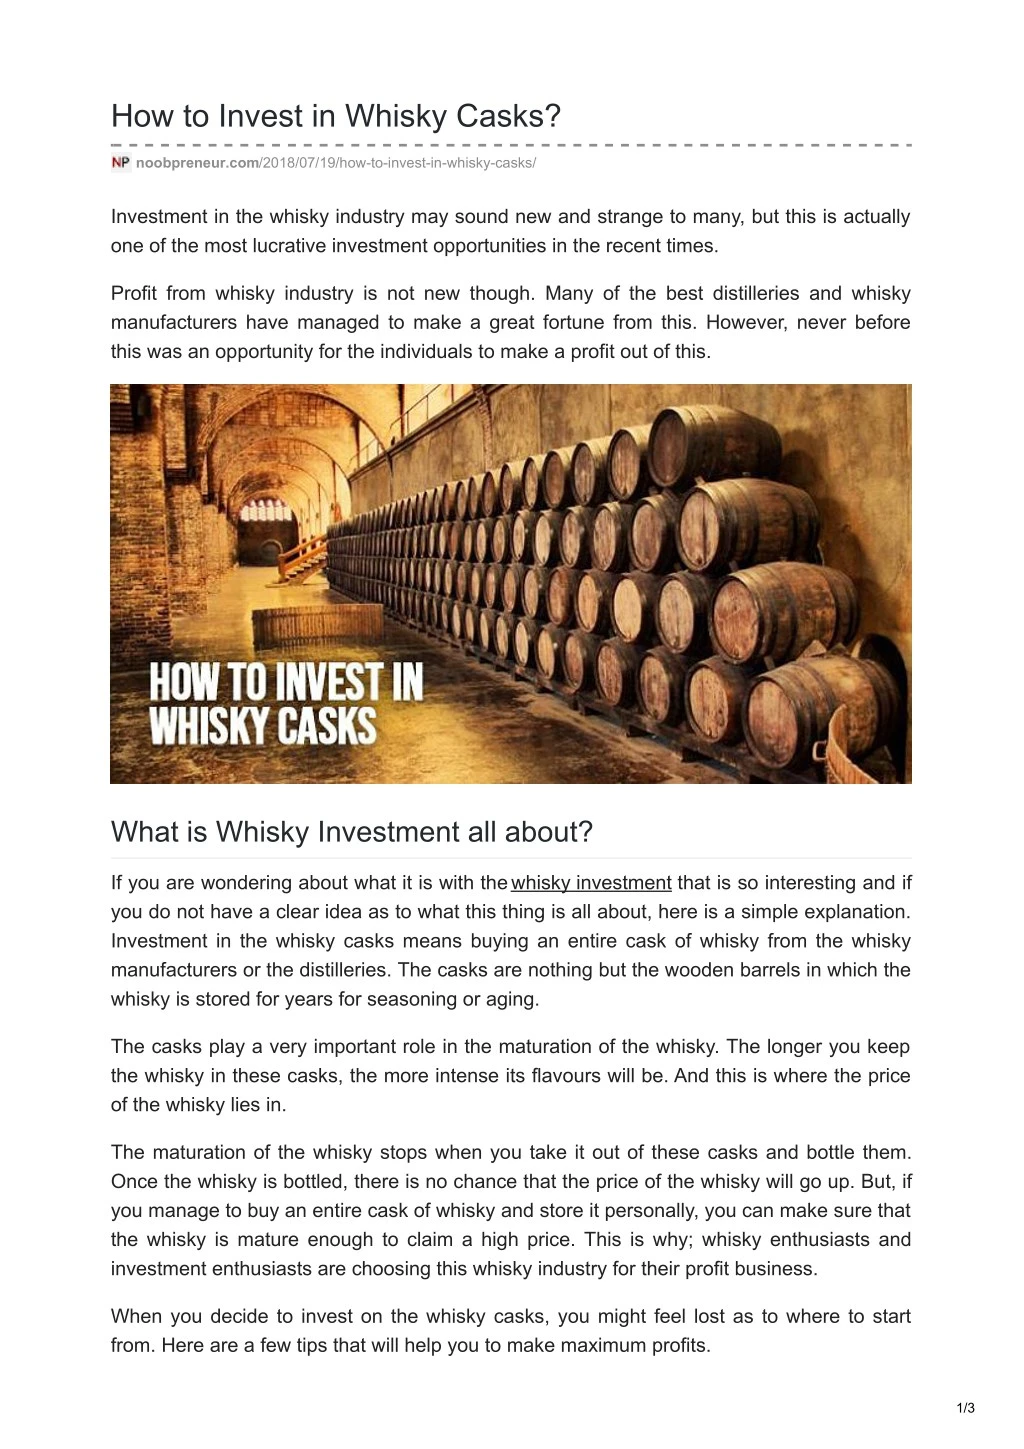 how to invest in whisky casks